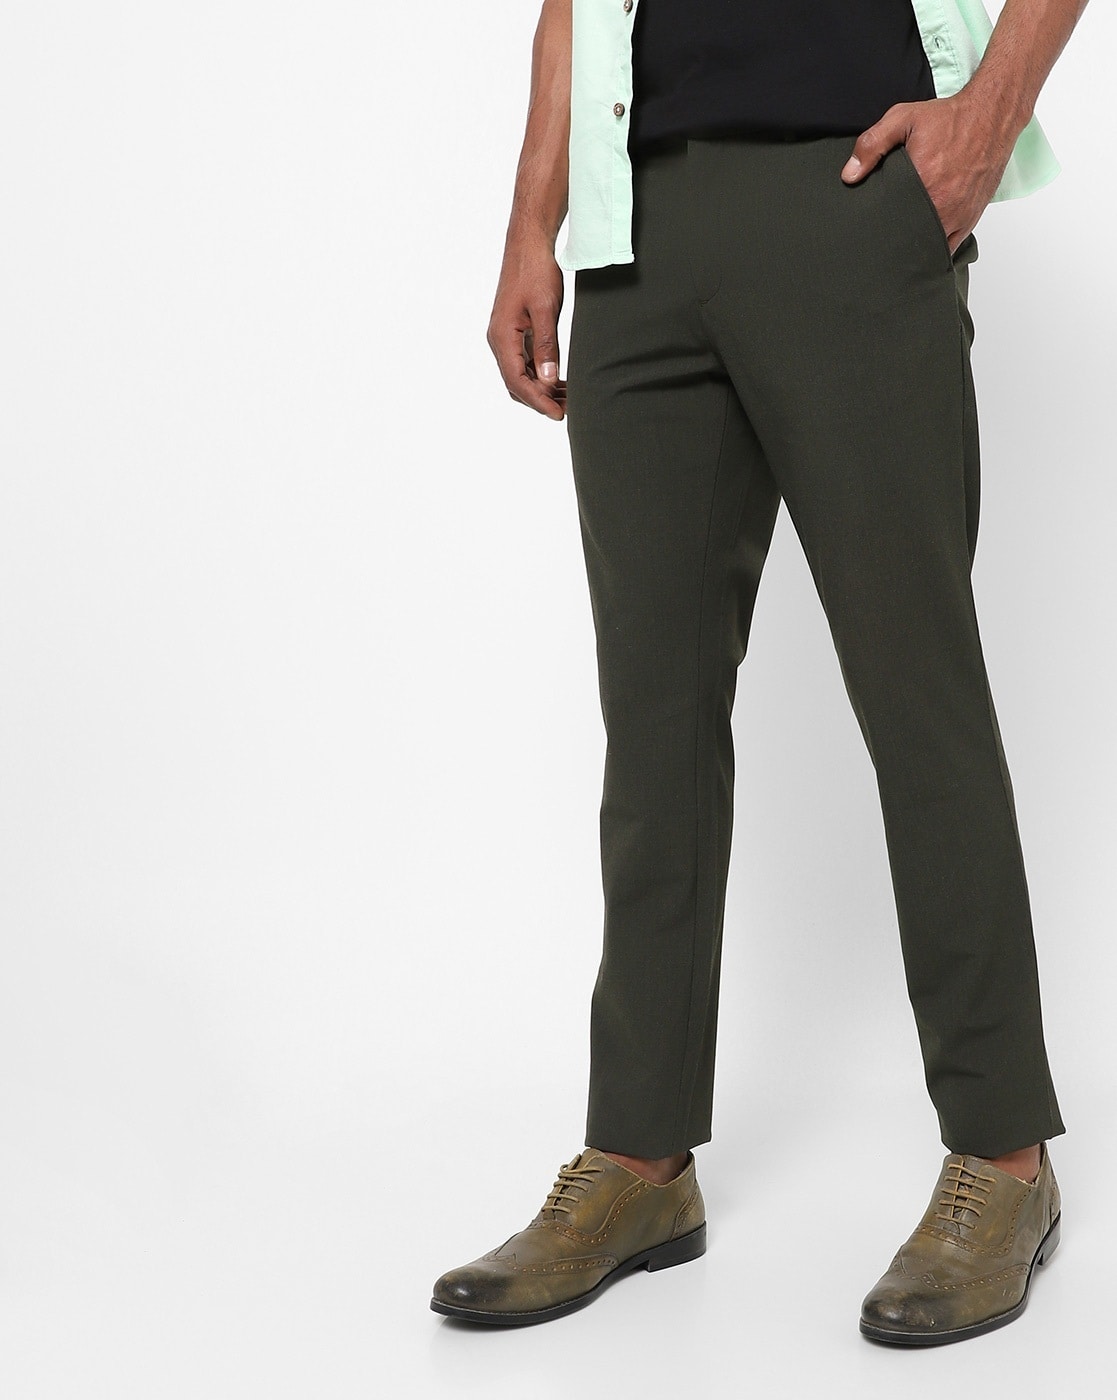 Powersutra Trousers and Pants  Buy Powersutra Regular Fit Stretch Trouser  White Online  Nykaa Fashion